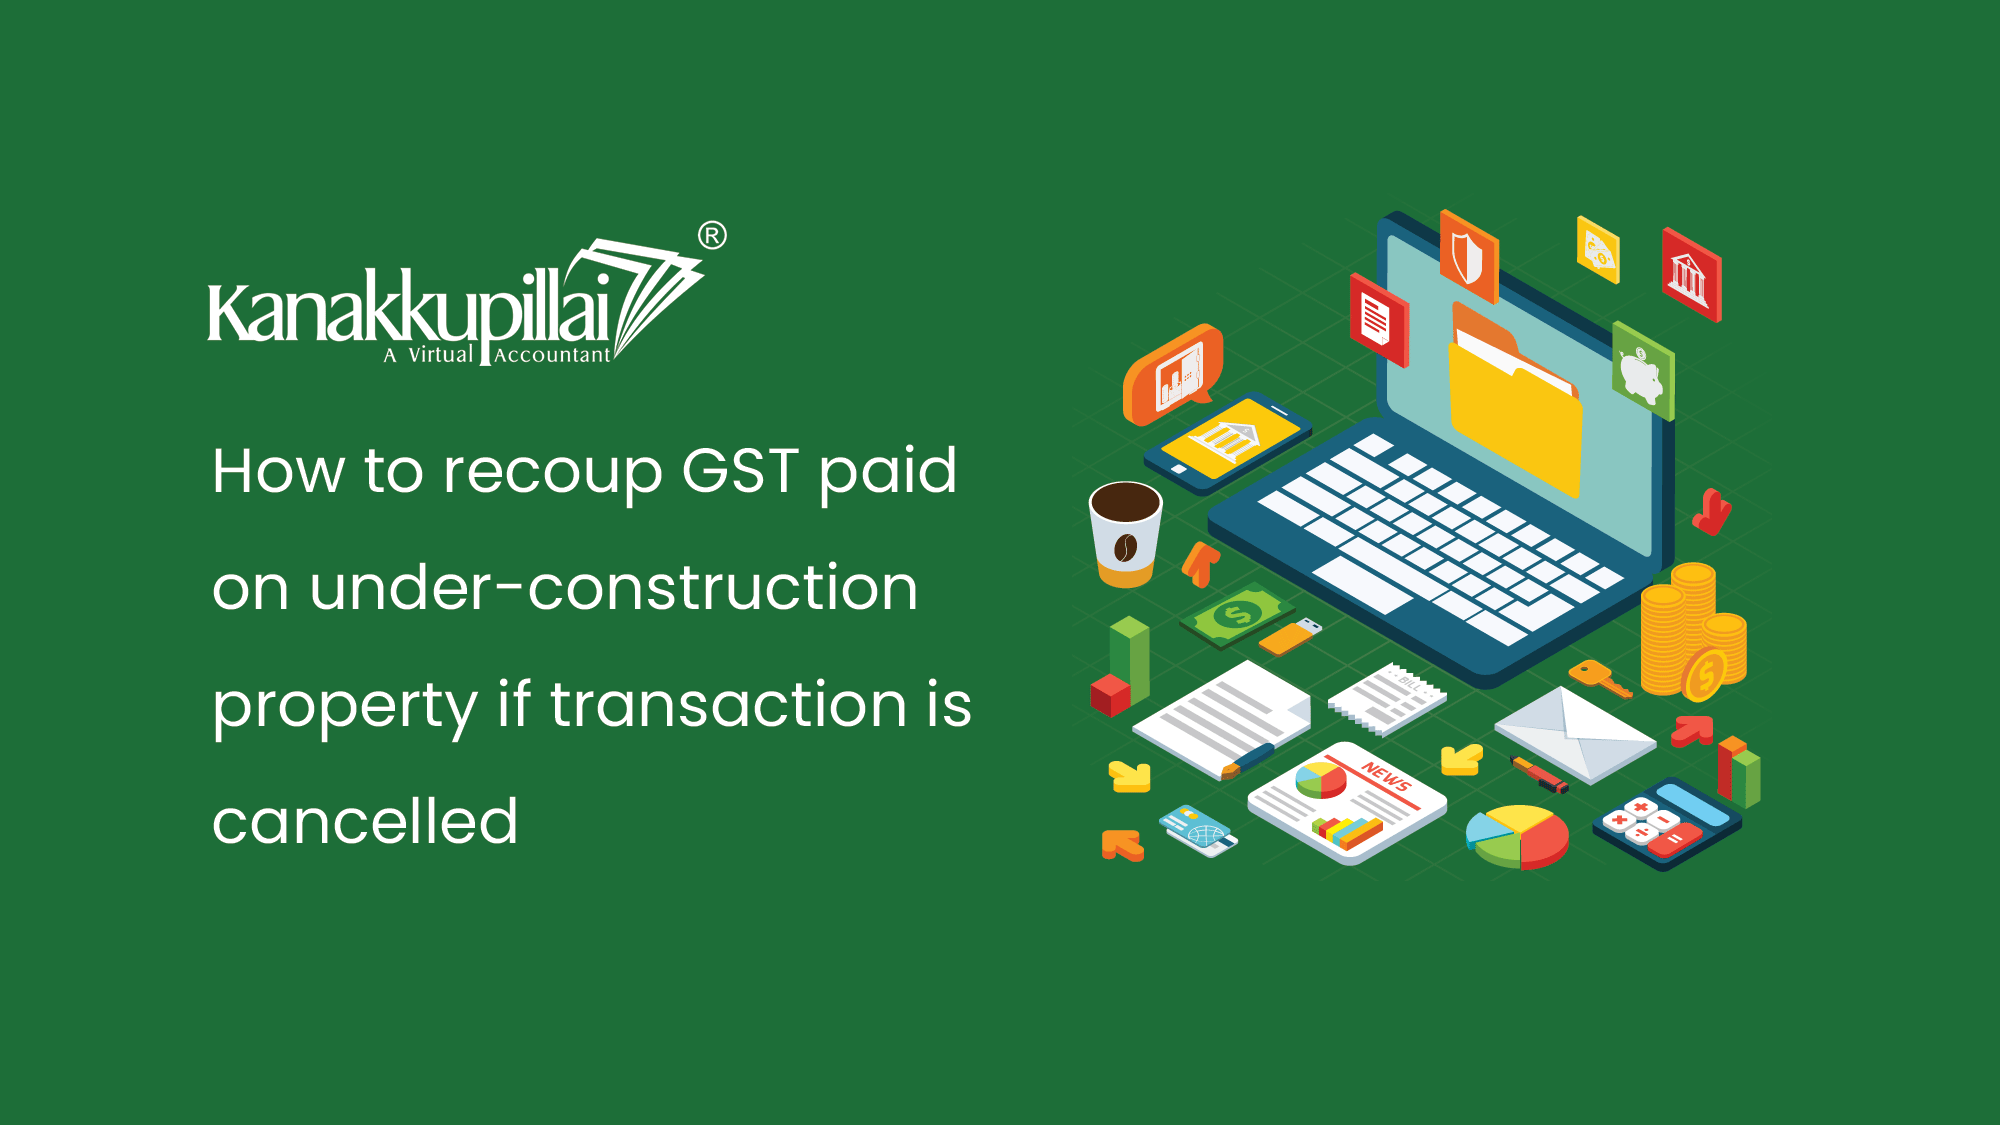 How to recoup GST paid on under-construction property if transaction is cancelled